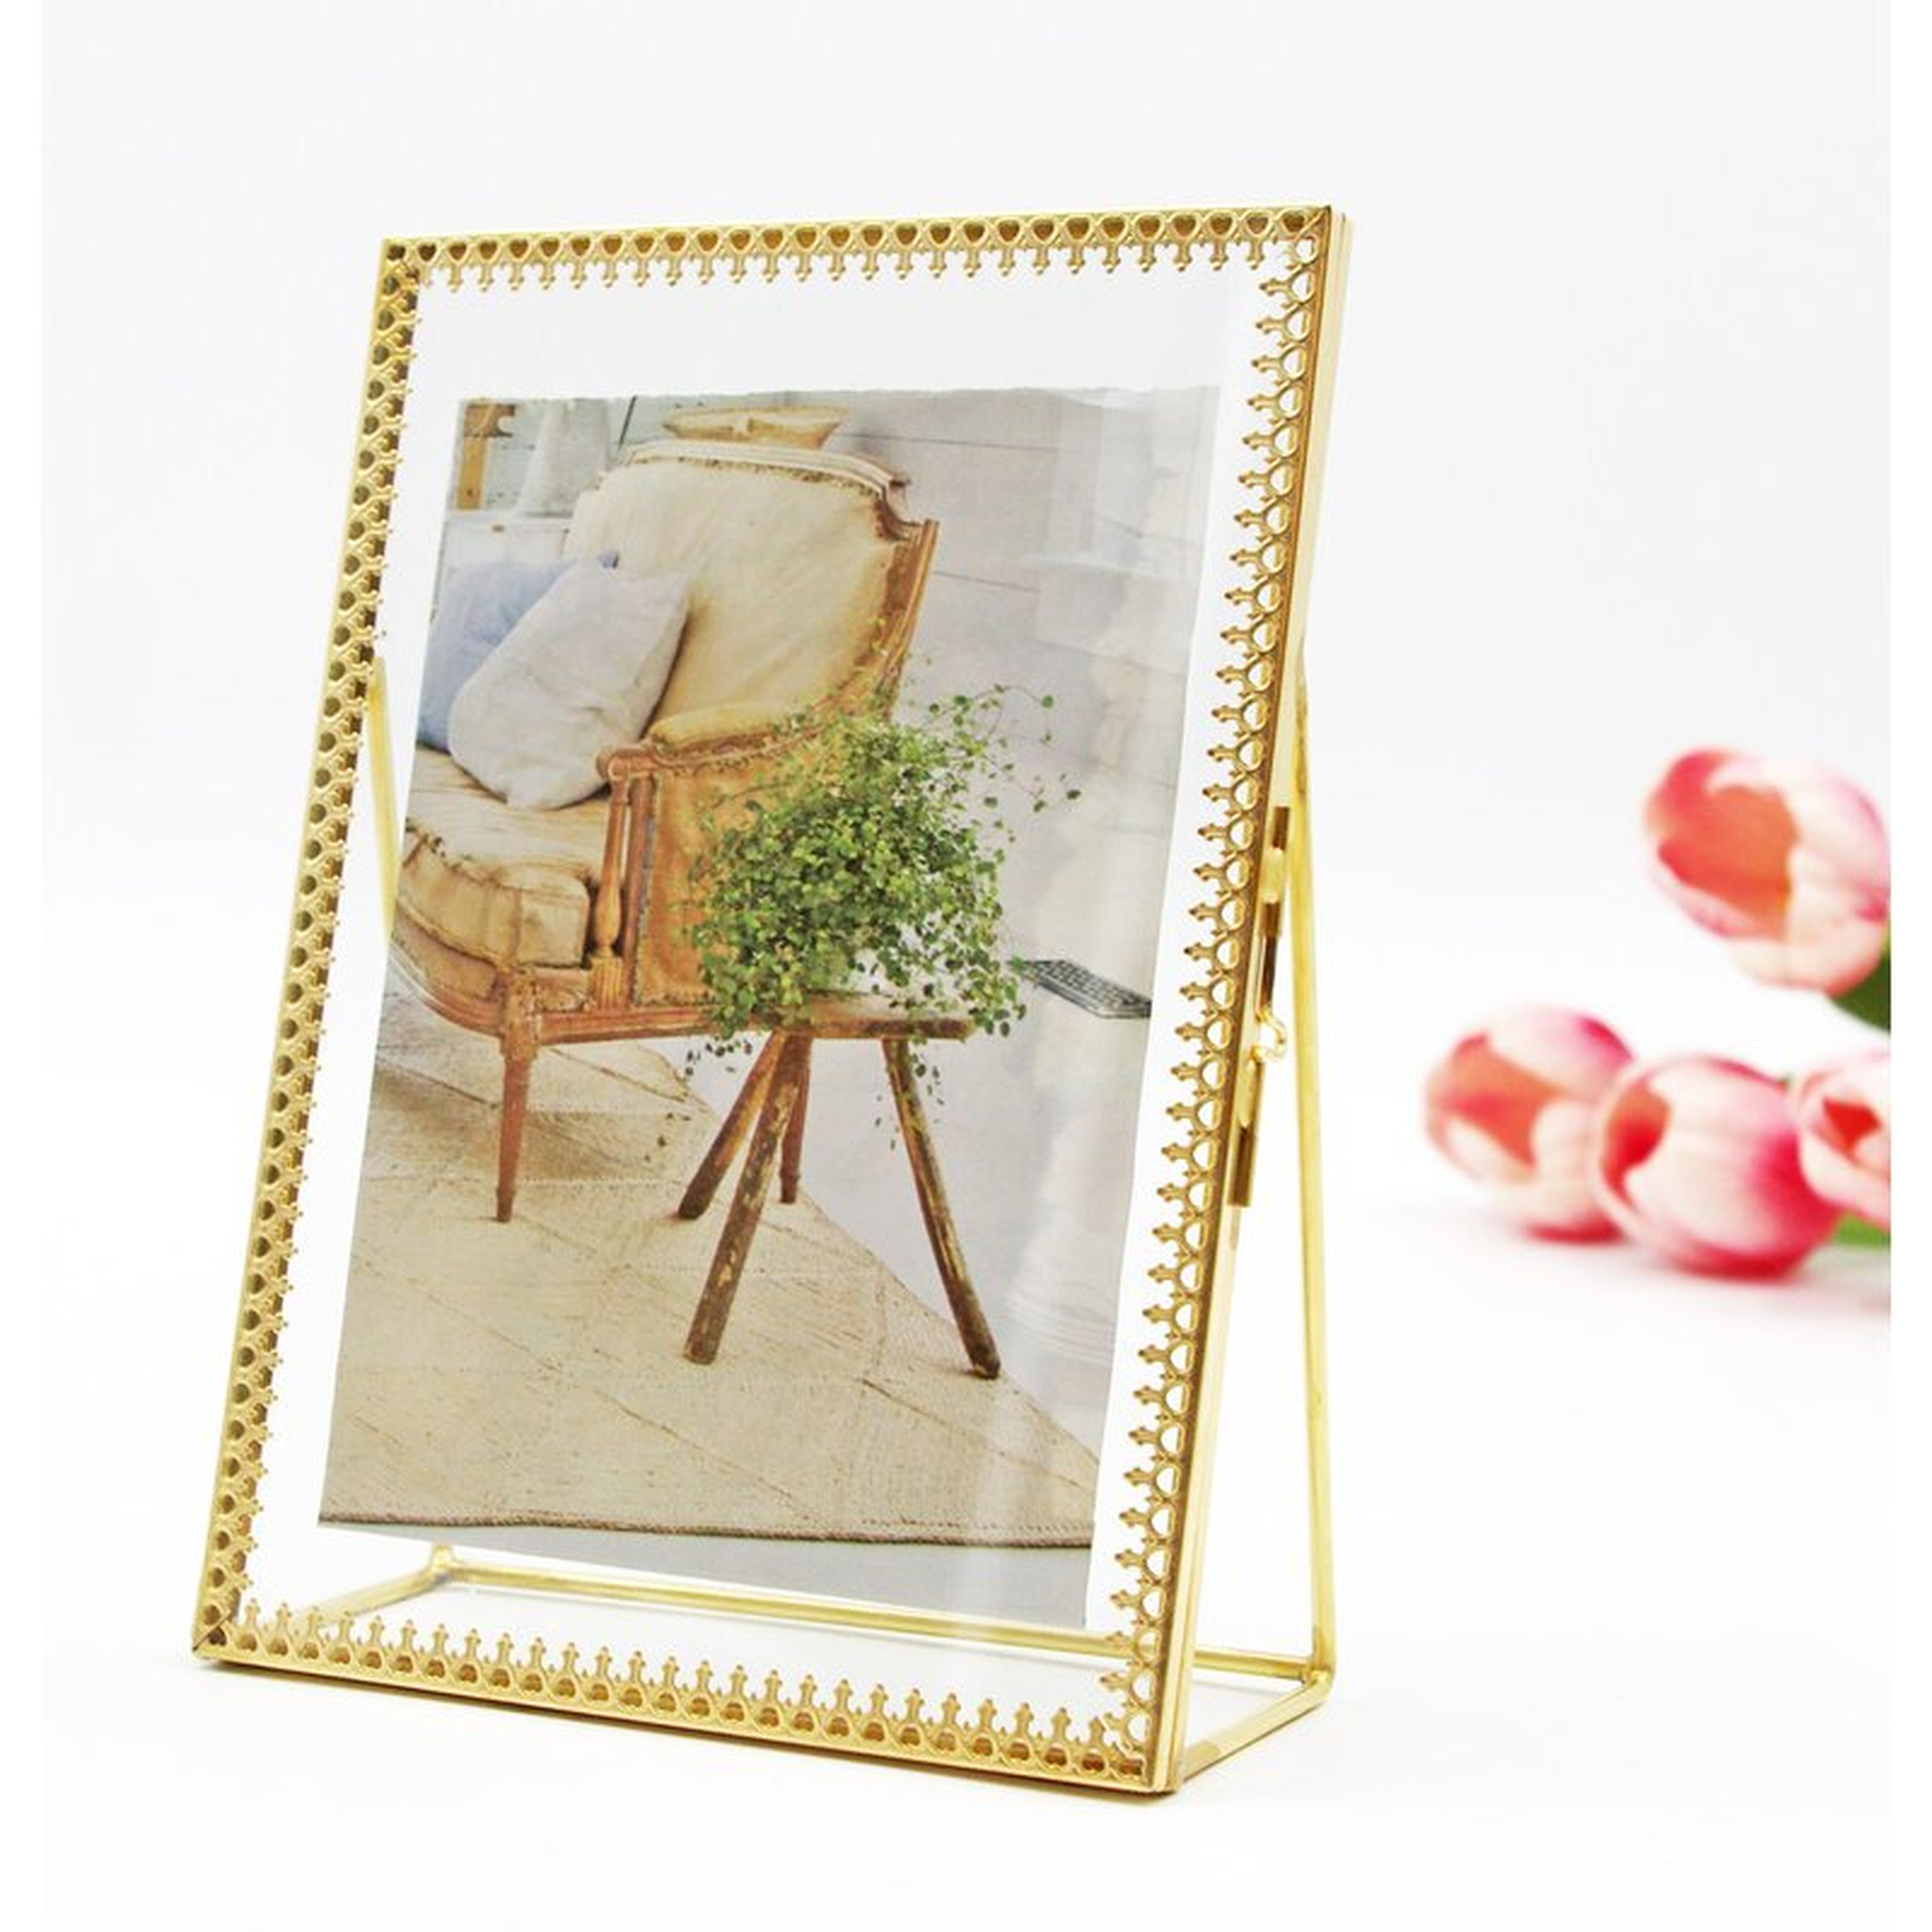 Quezada Hinged Cover Picture Frame - Wayfair